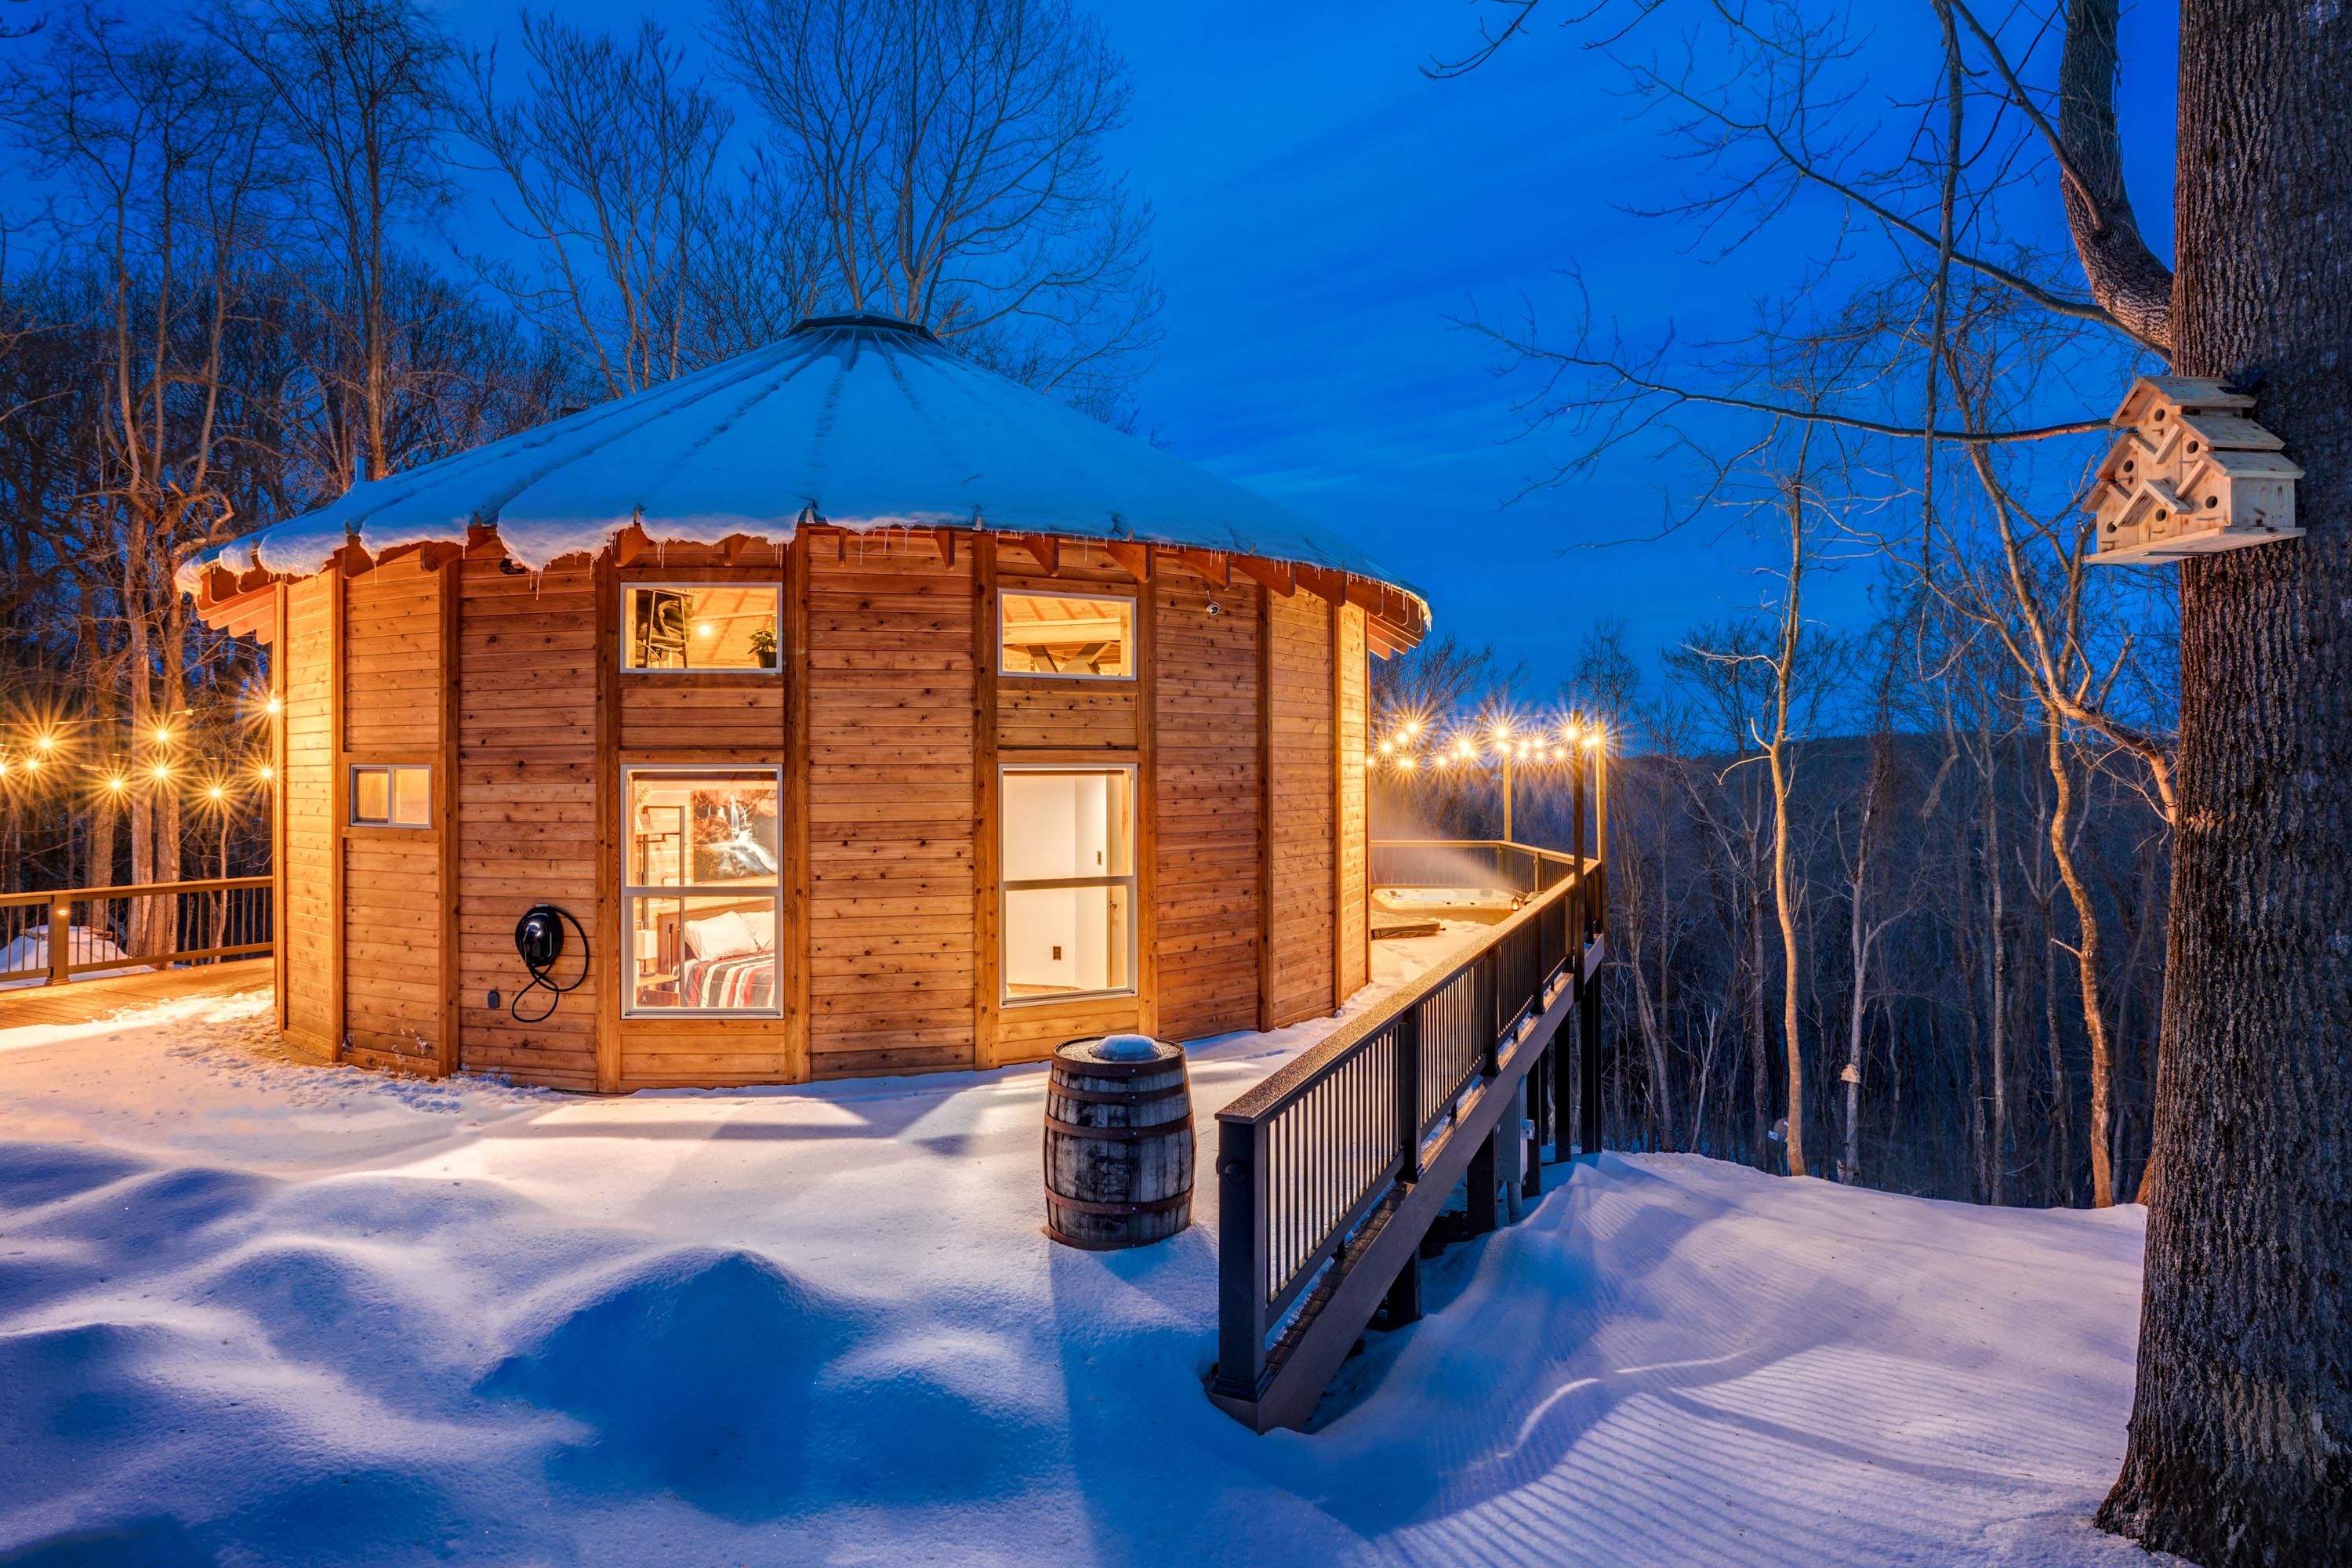 <span  class="uc_style_uc_tiles_grid_image_elementor_uc_items_attribute_title" style="color:#ffffff;">Cozy winters, EV charger, well-lit deck with string lights, and a large hot tub!</span>